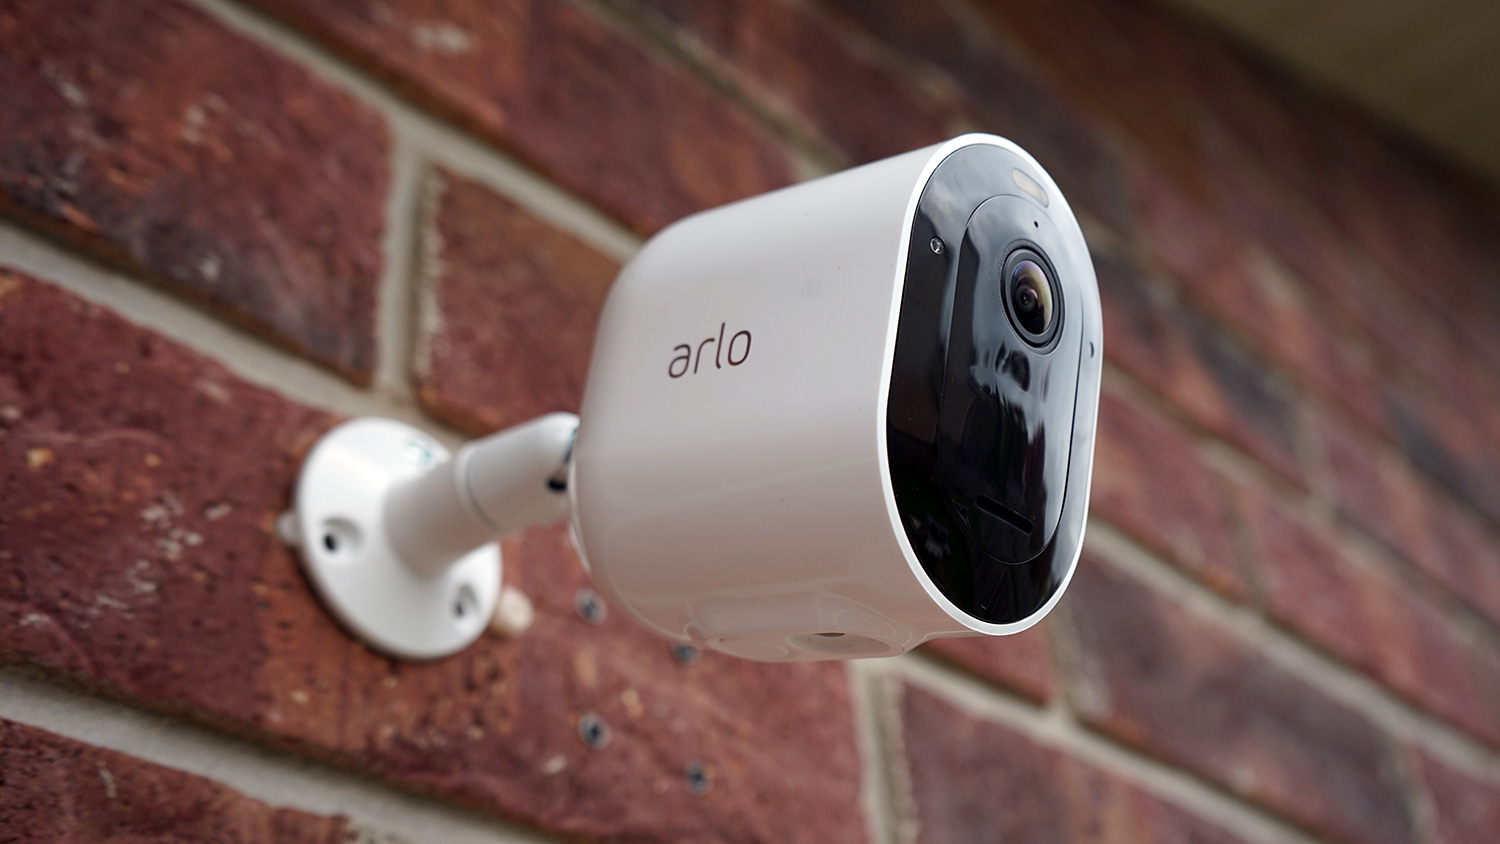 Pro 3 Review: Great Choice For Smart Home Security | Digital Trends